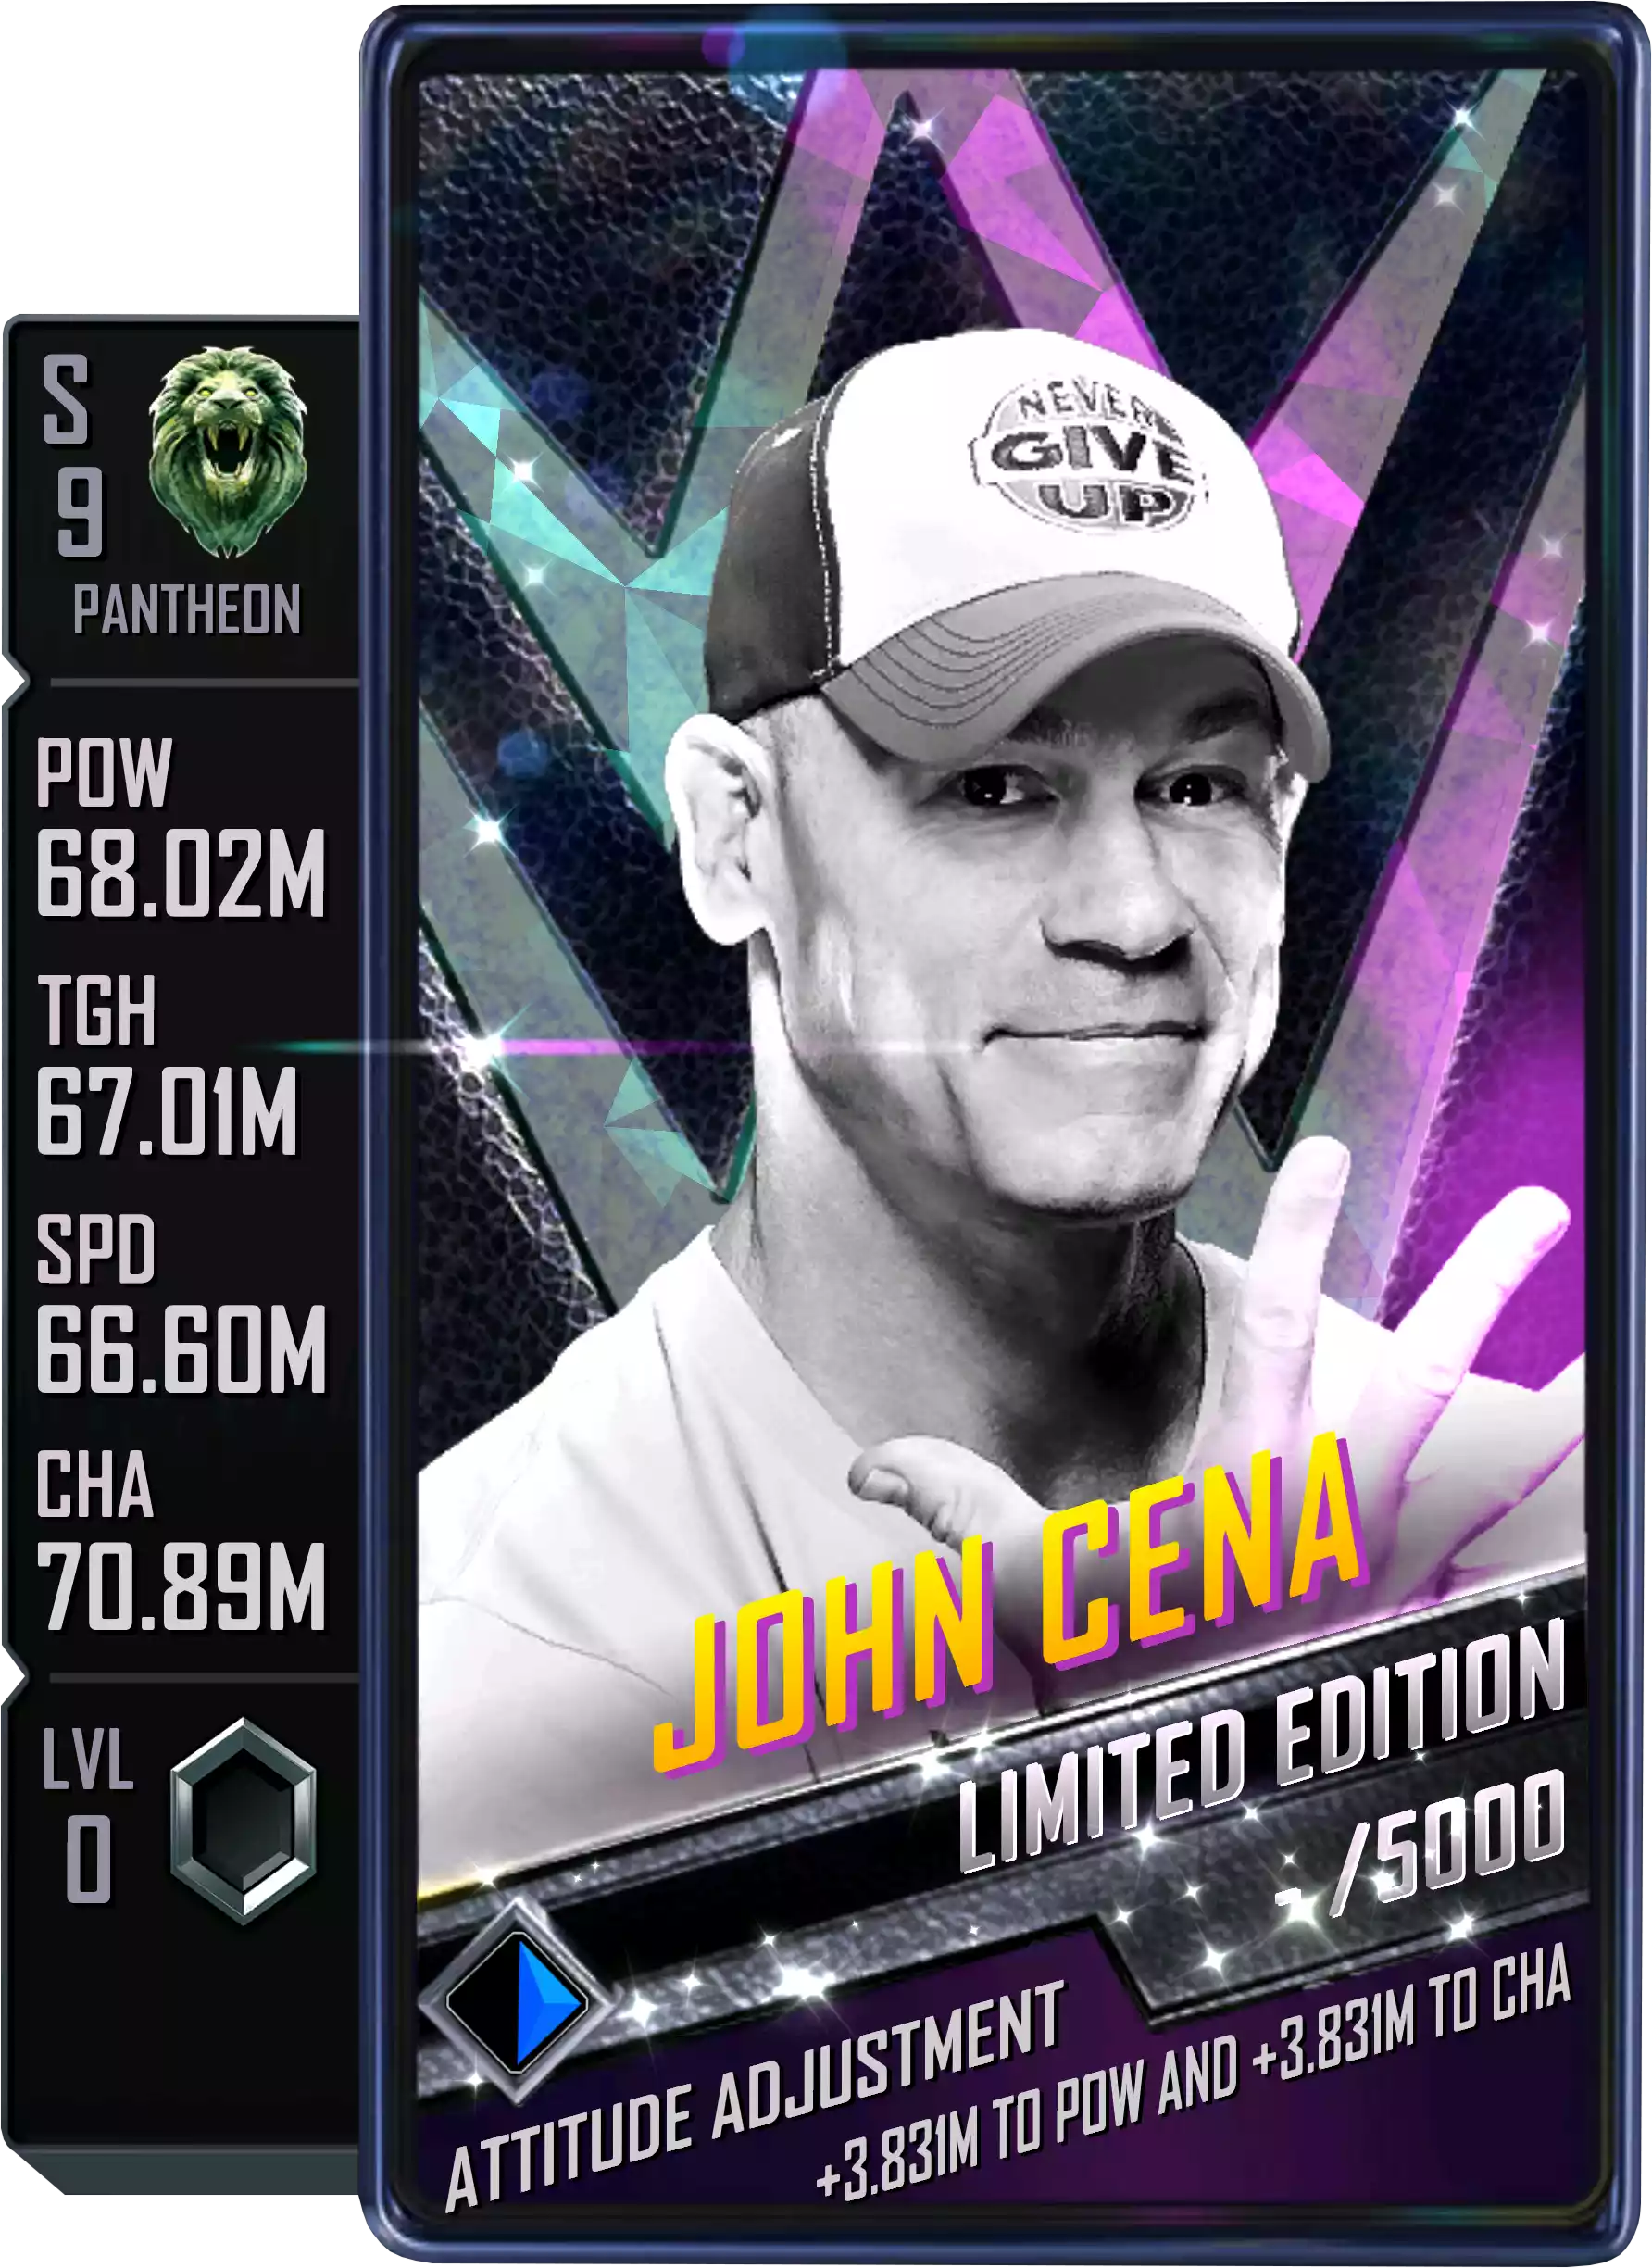 Pantheon - John Cena - Special and Limited Edition Card from WWE Supercard